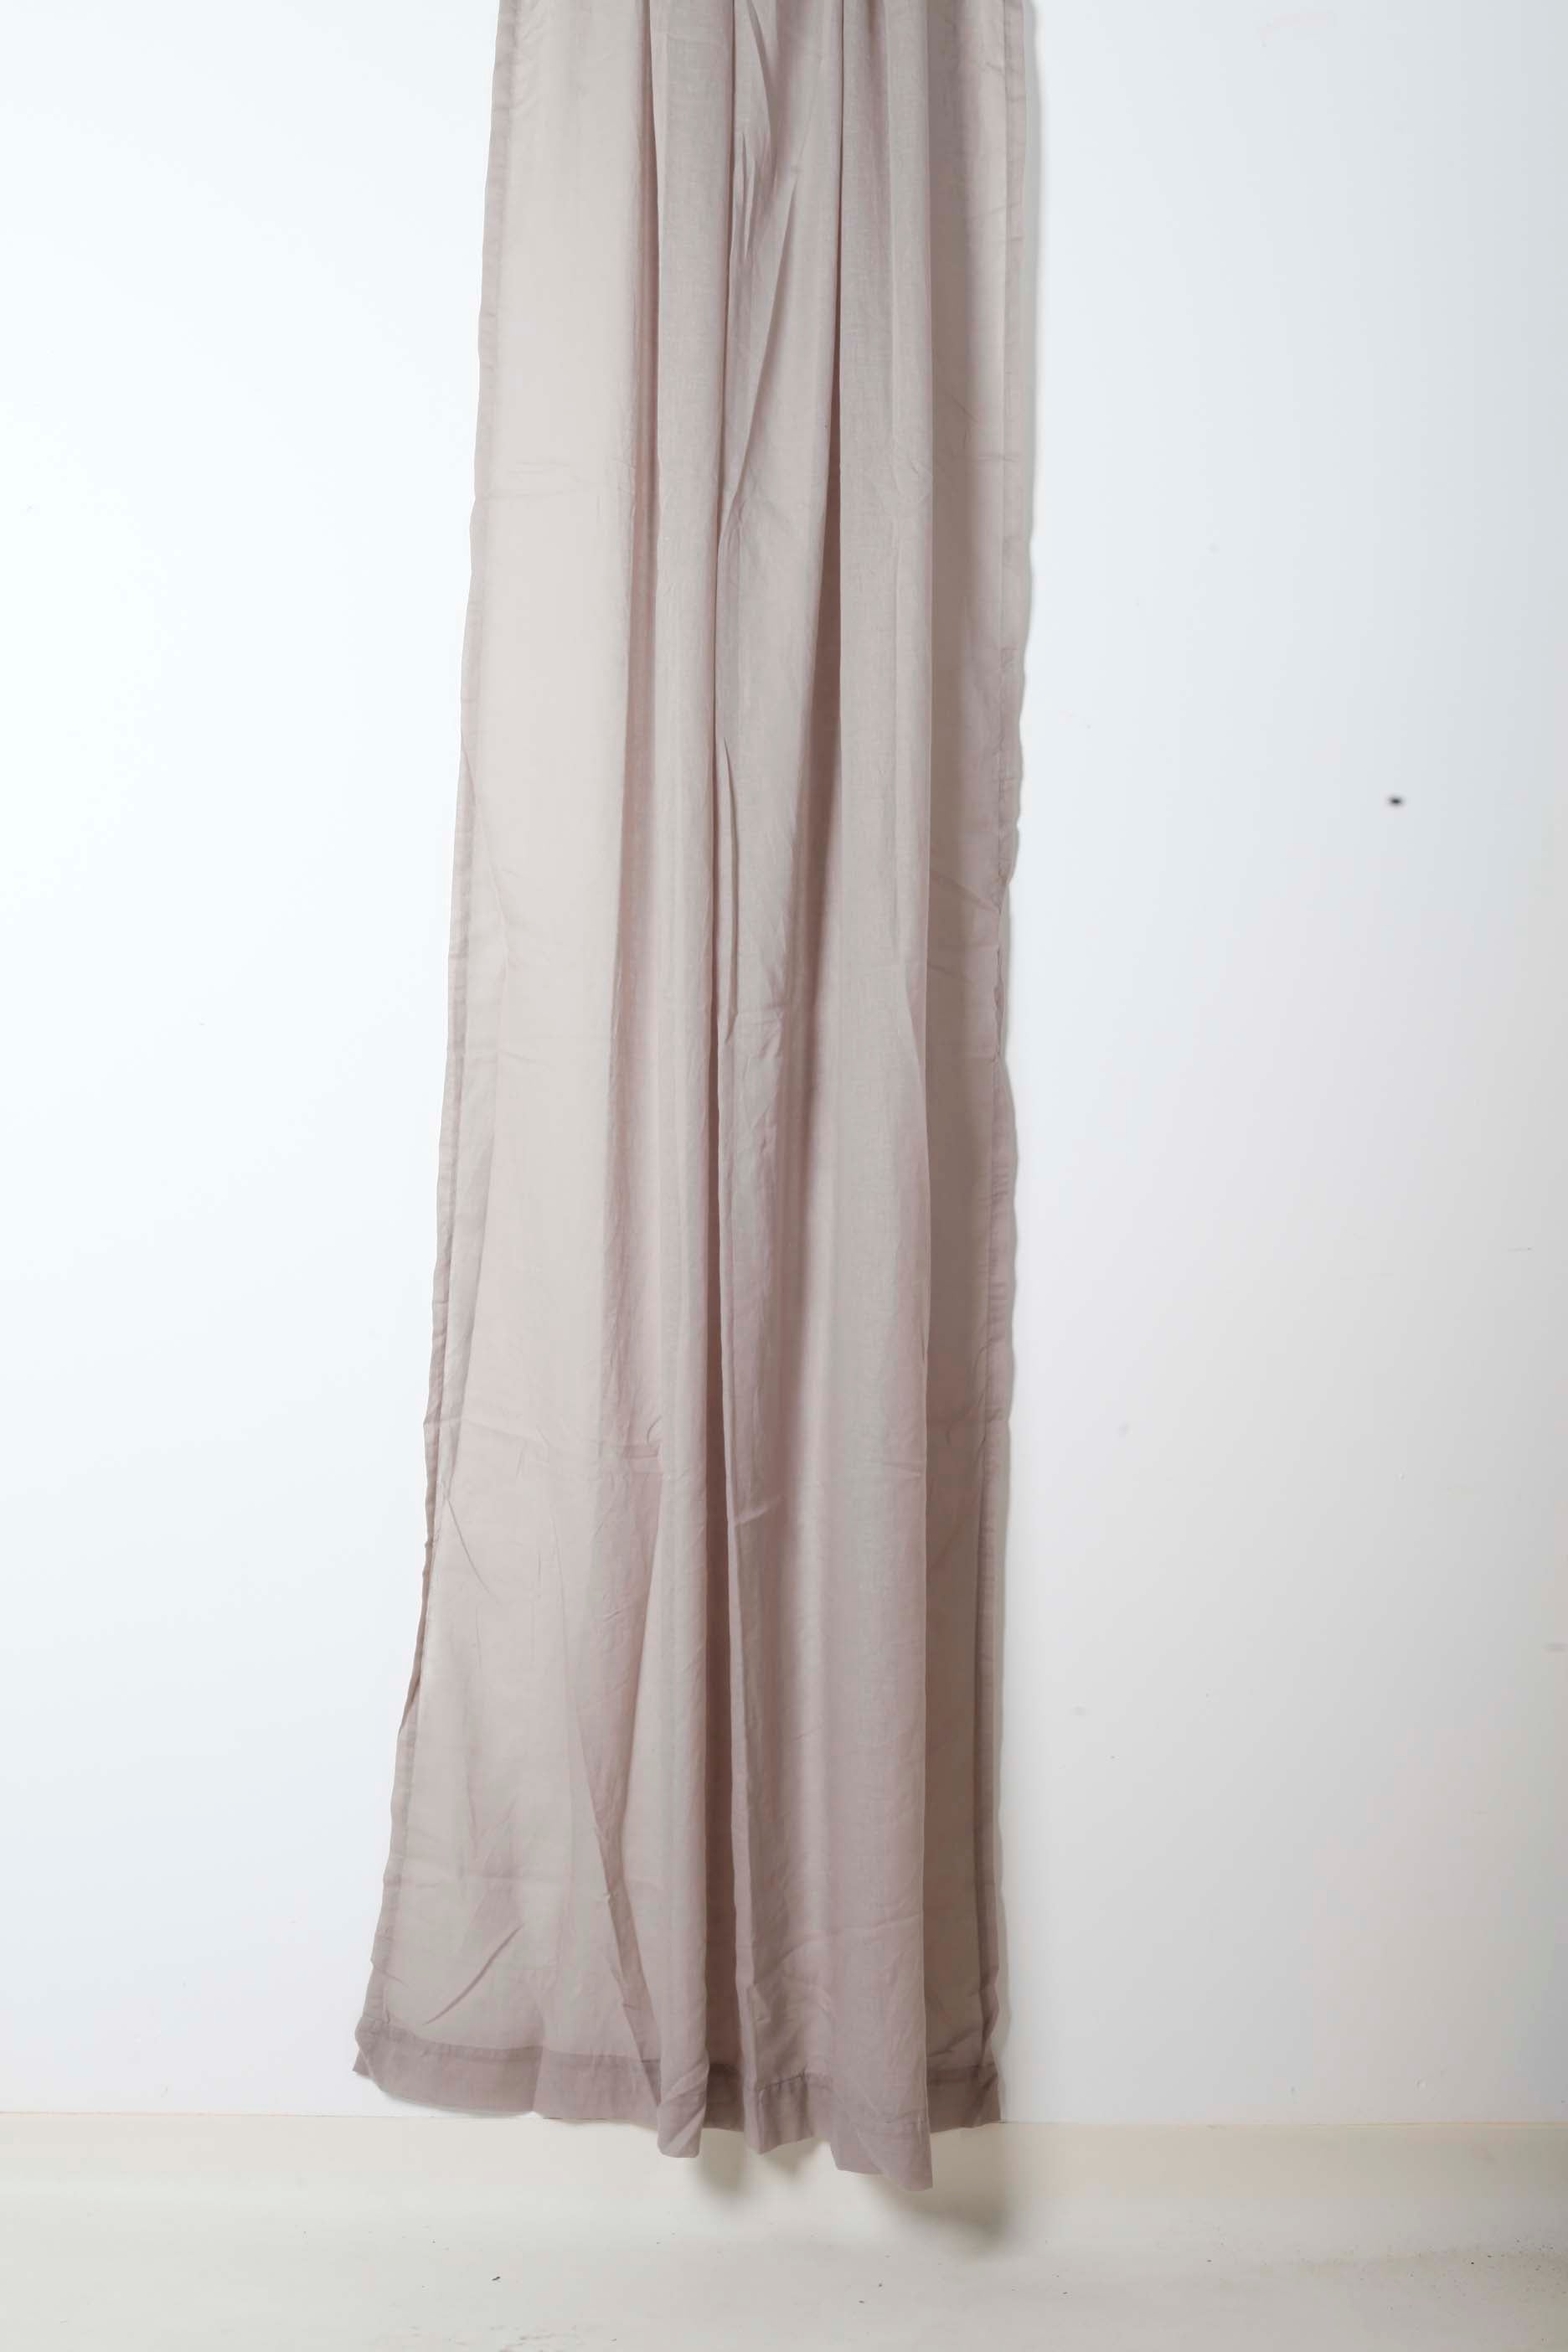 Taupe Linen Curtain Panel